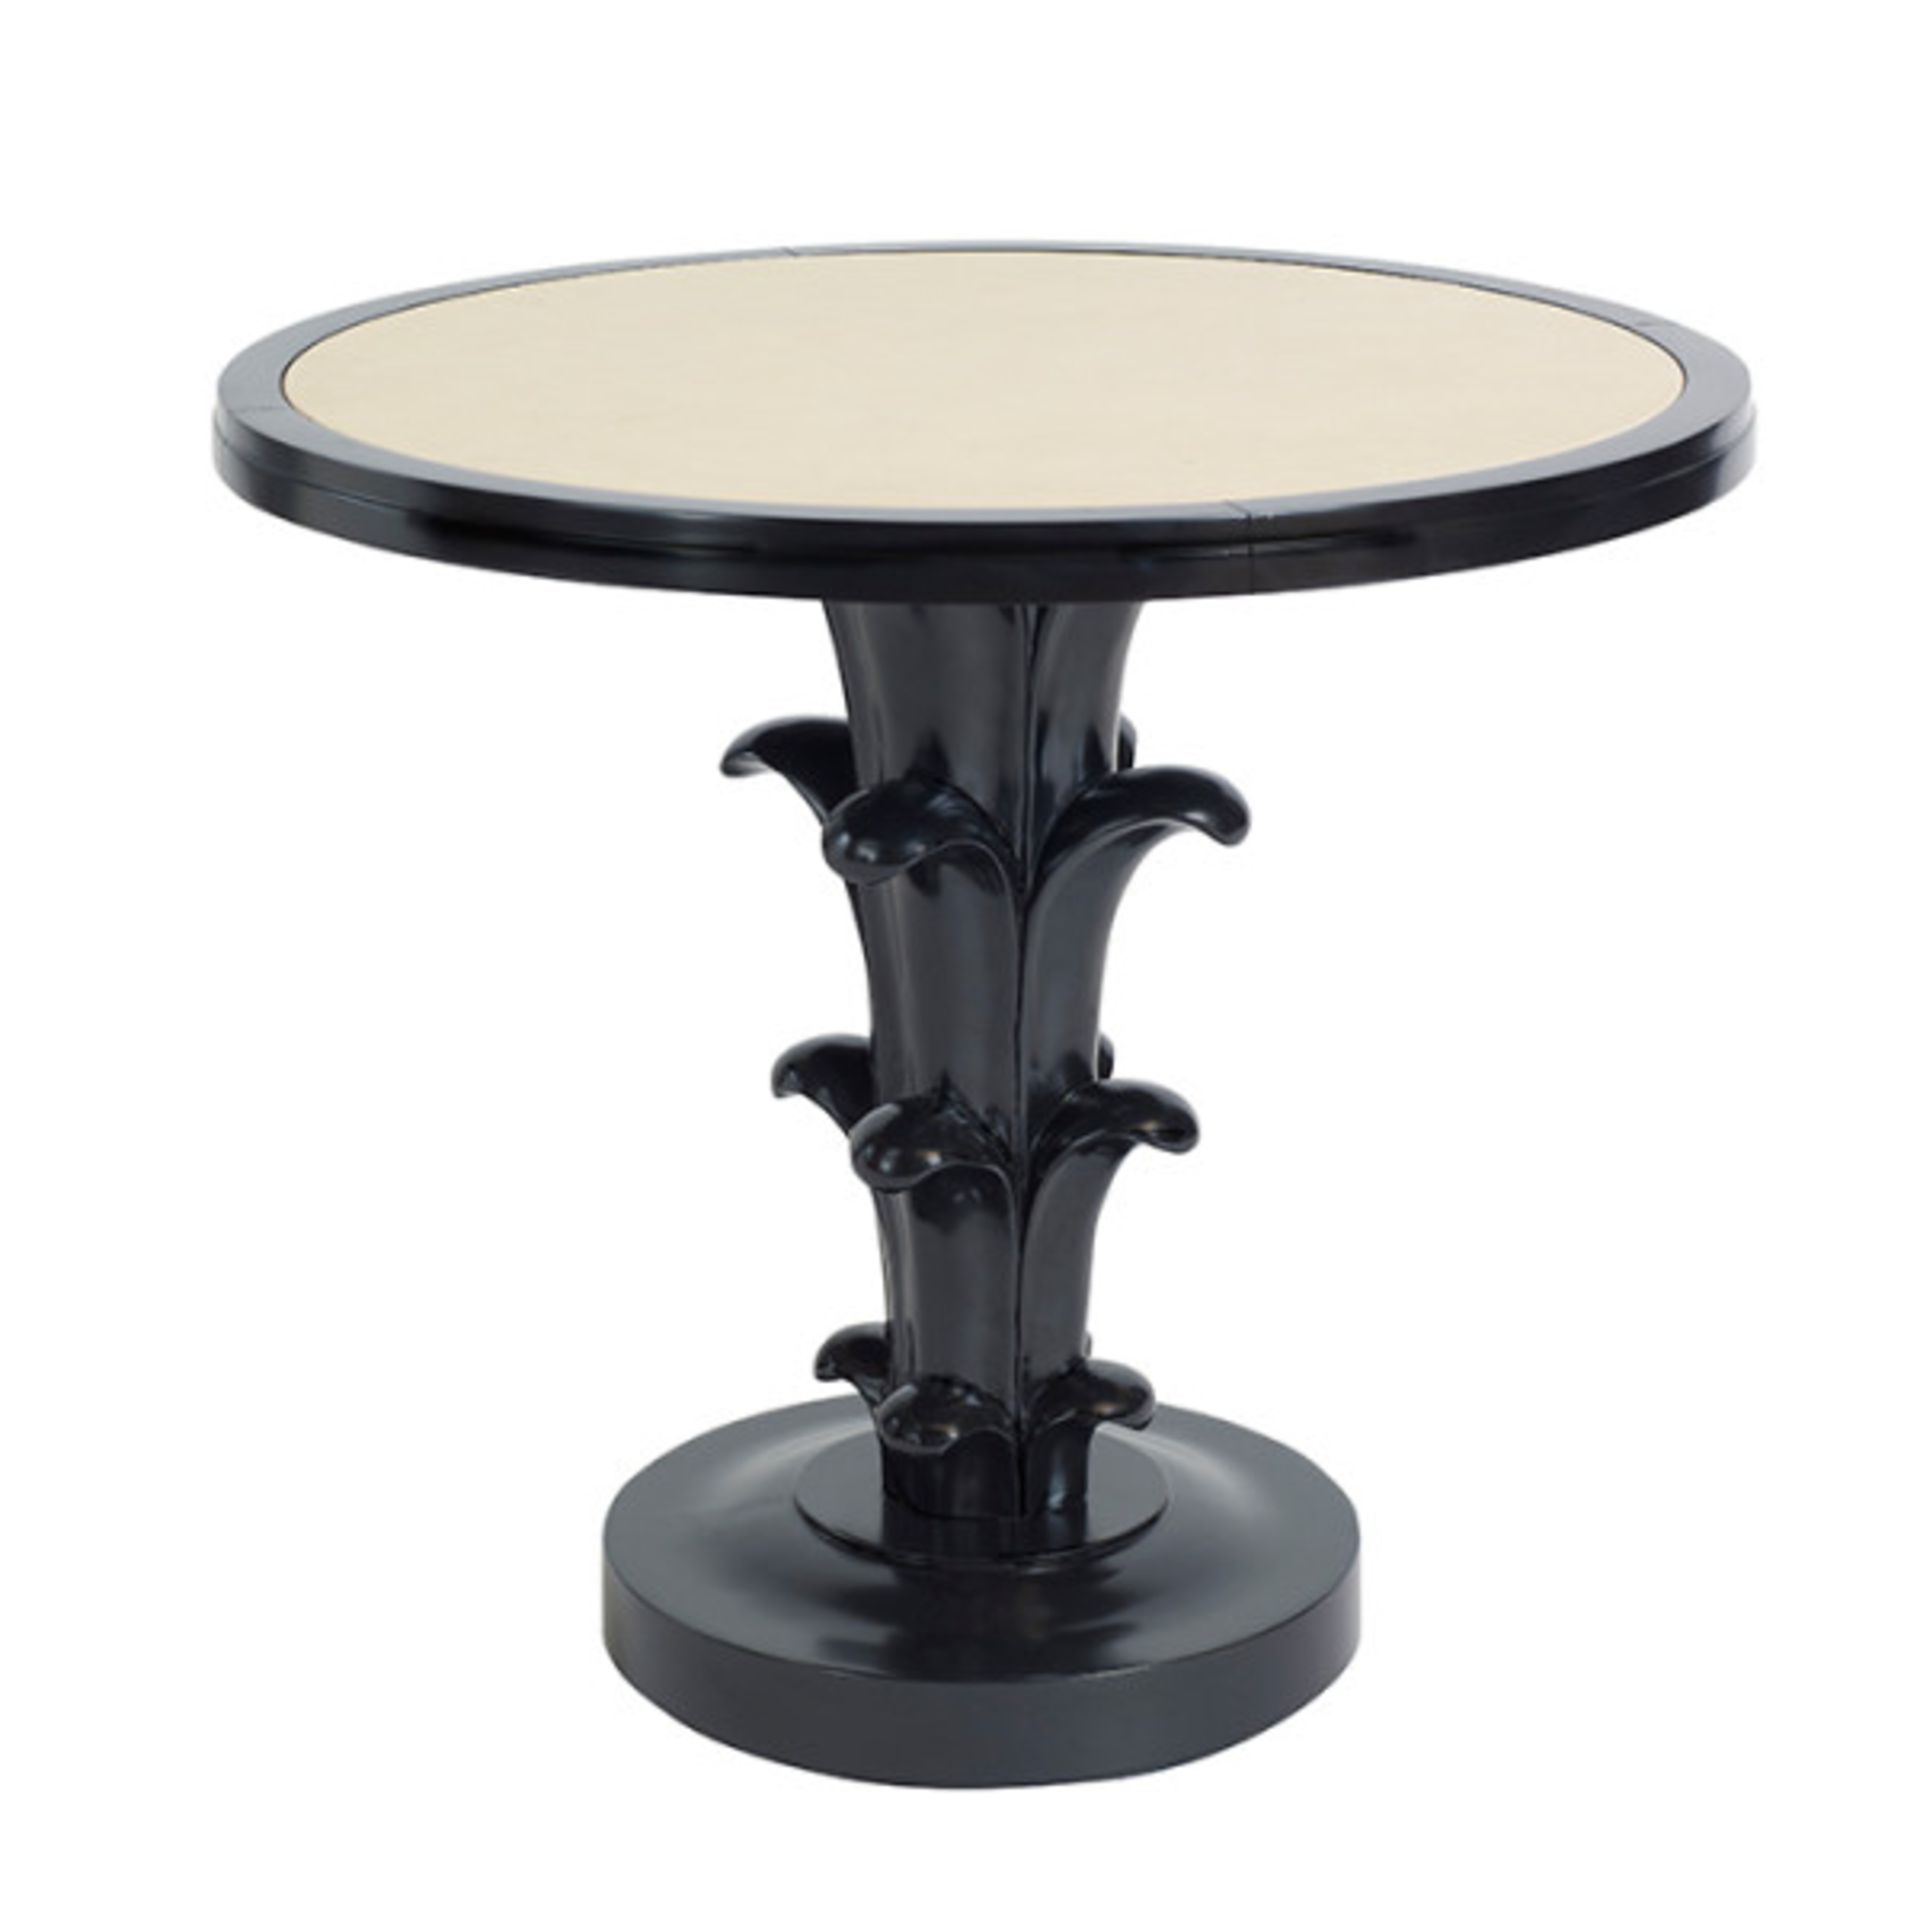 Maison 55 Aubrey Side Table 68.6 x 68.6 x 63.6 cm Delicate and glamorous, this sleek, modern side